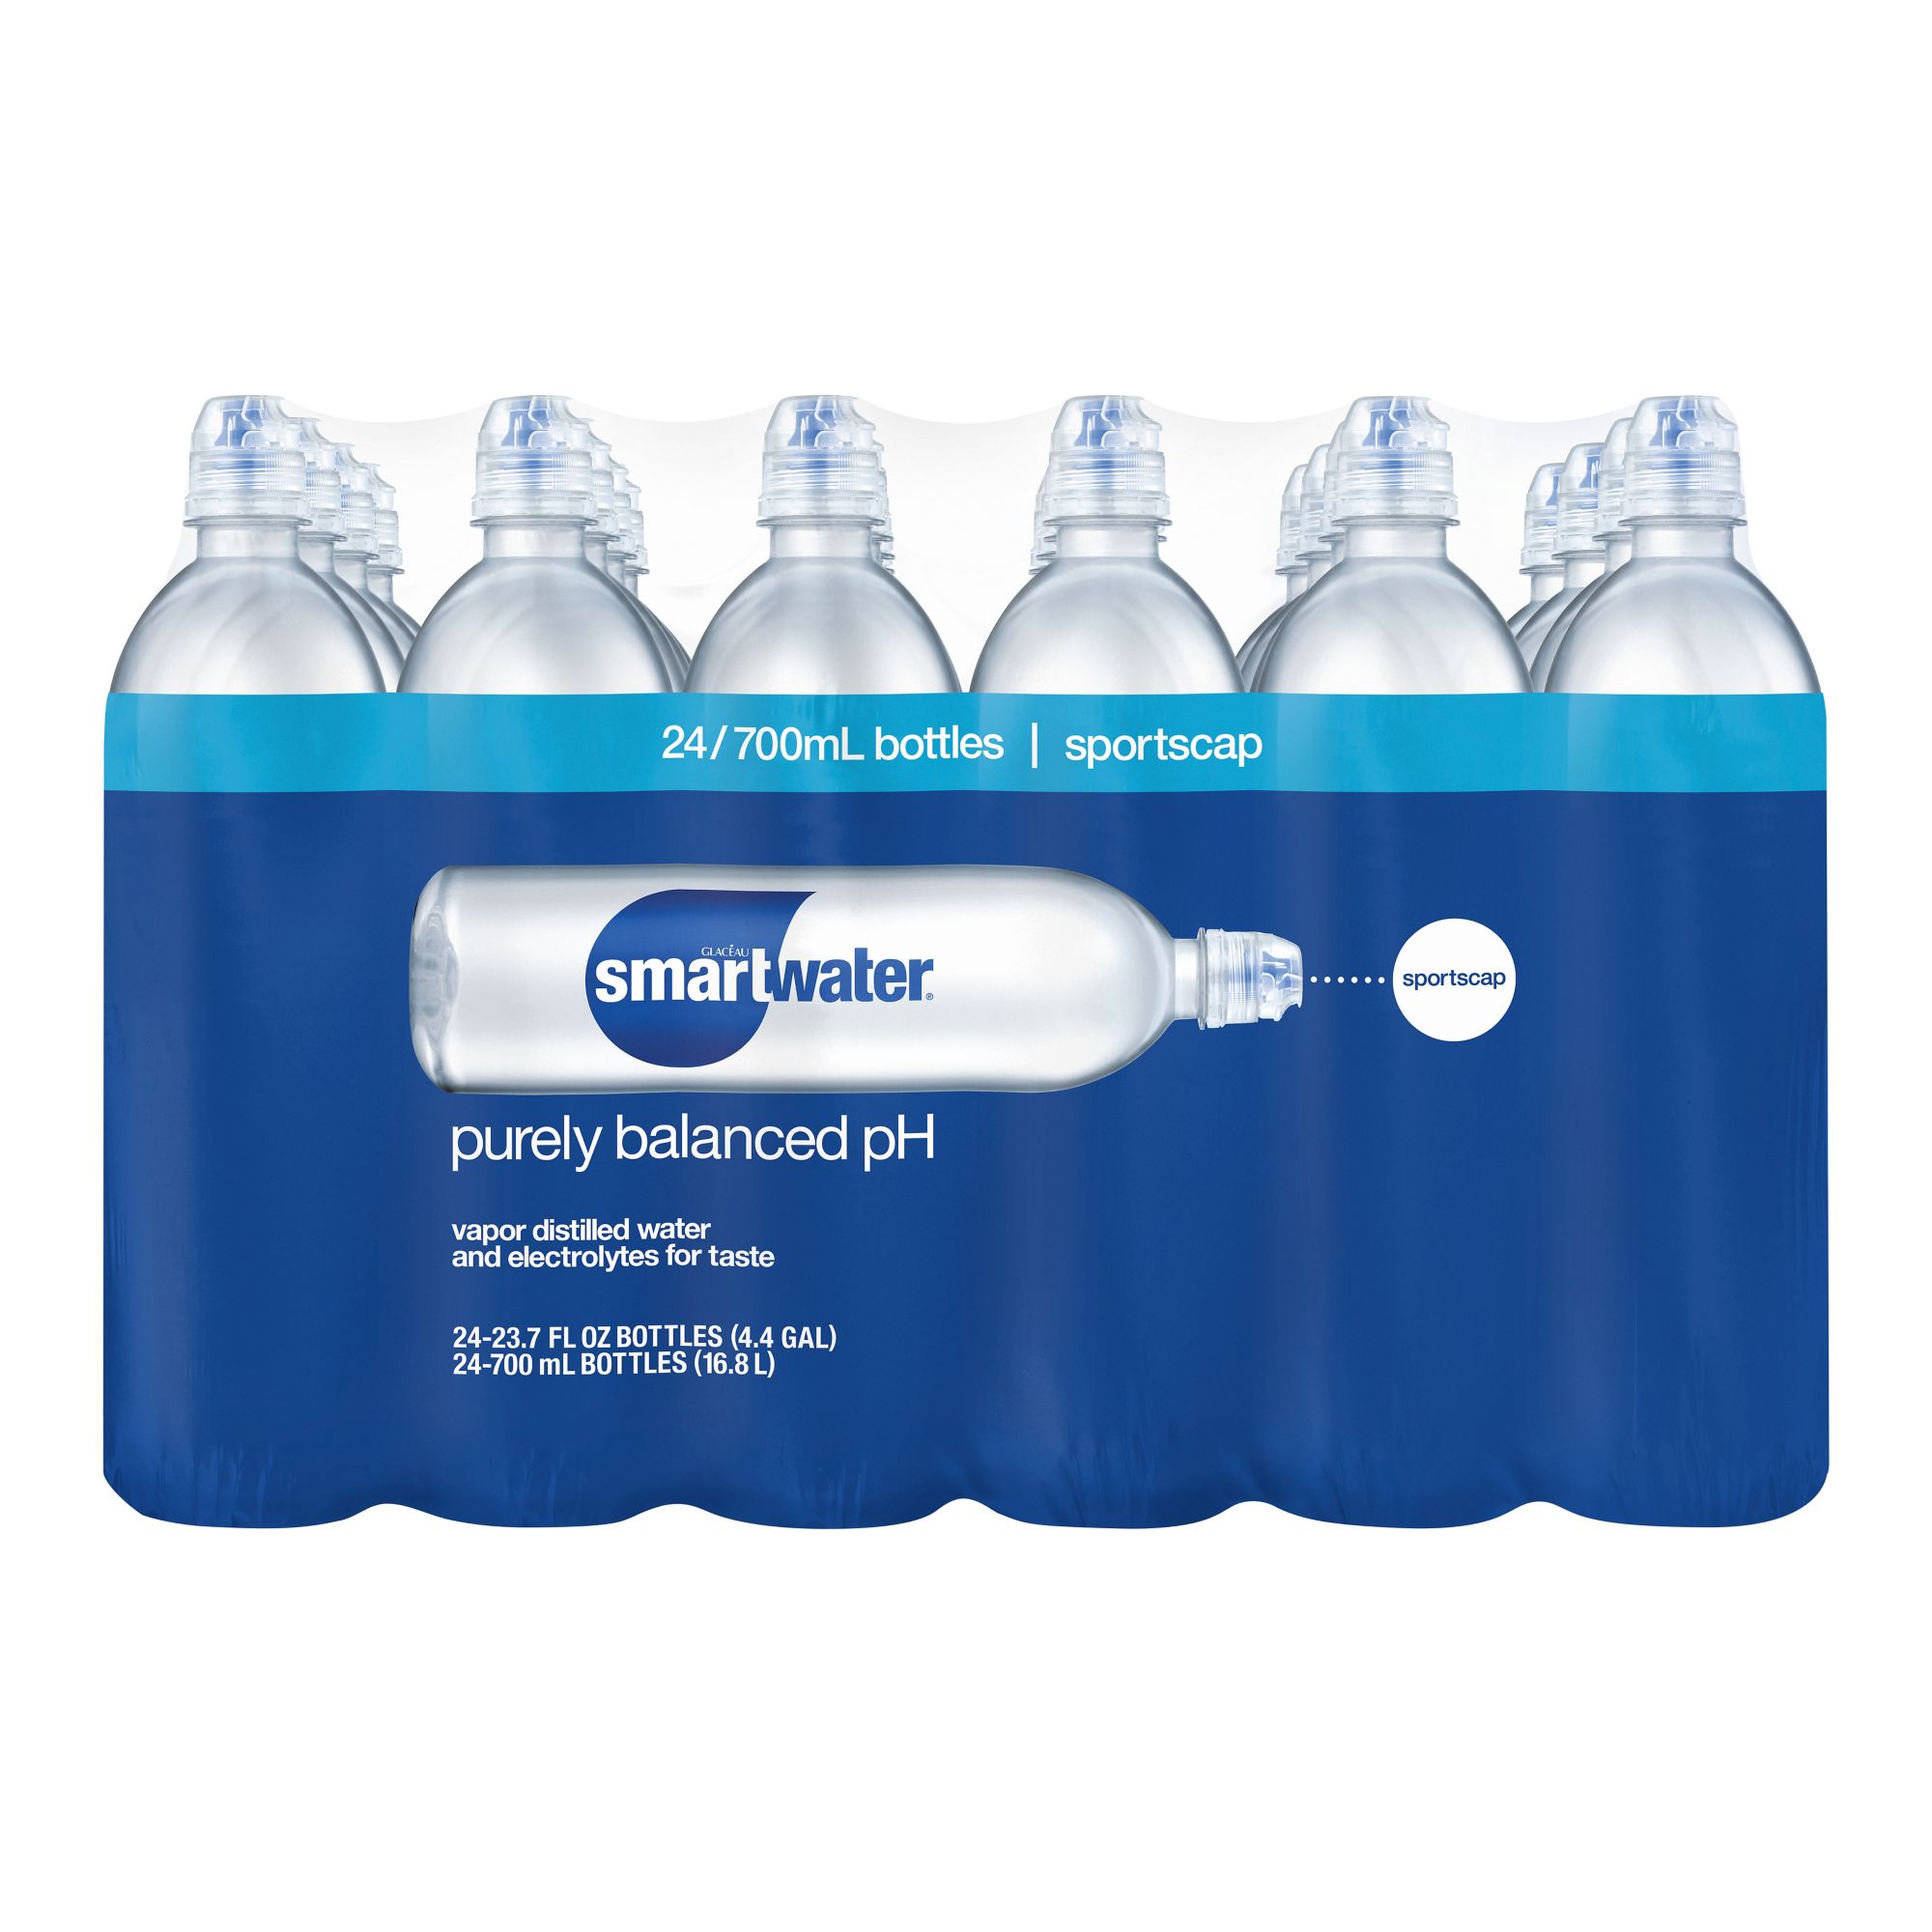 smartwater® homepage  vapor distilled water with electrolytes